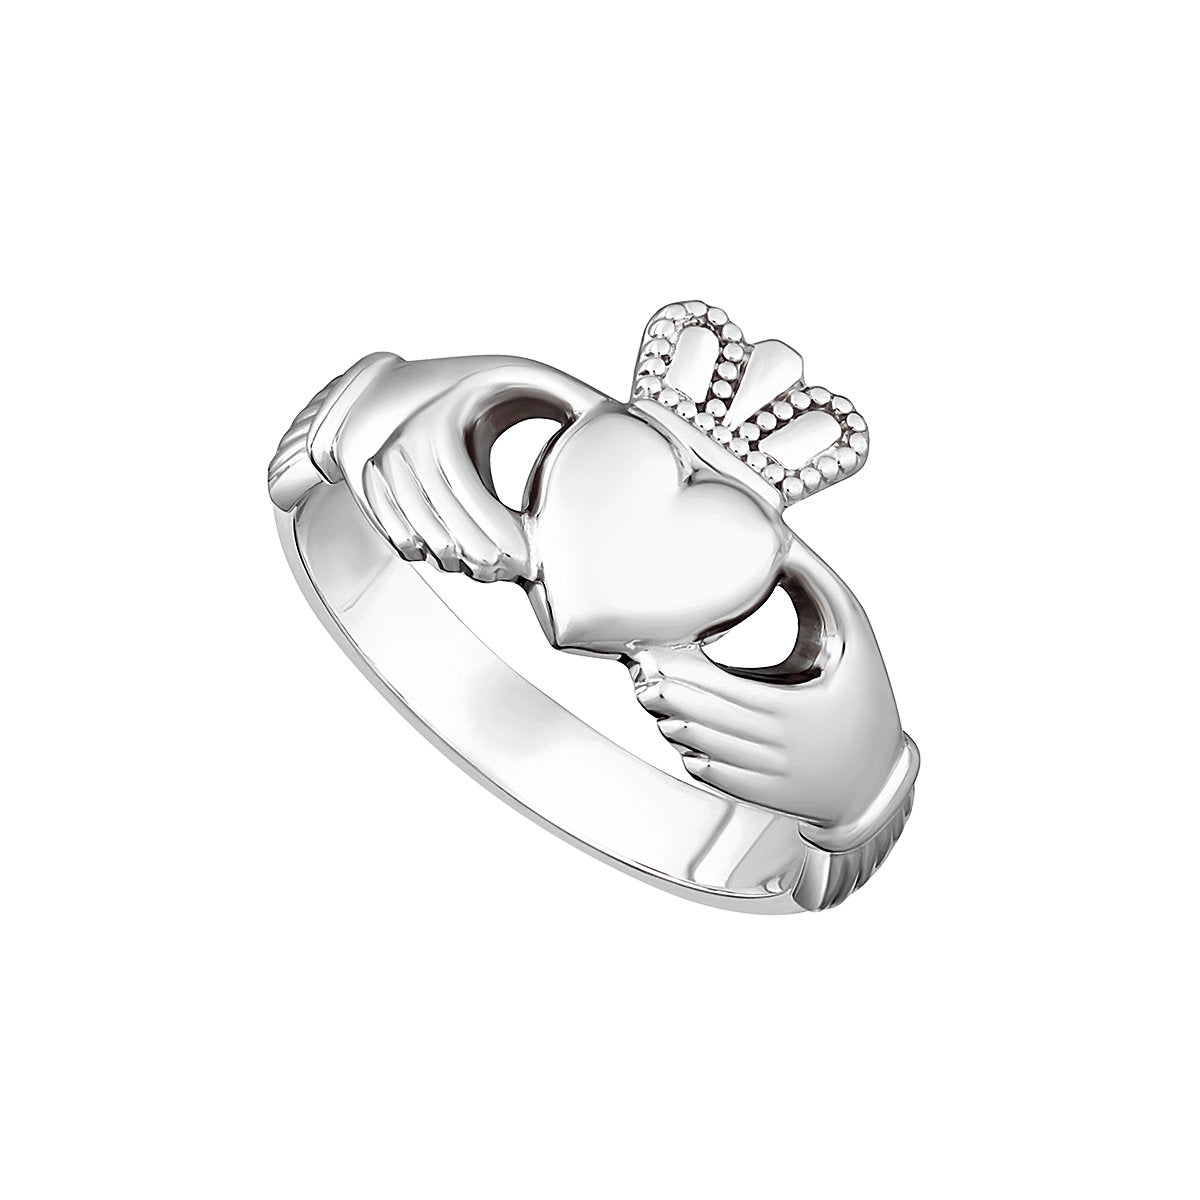 SILVER LADIES CLADDAGH RING S2543